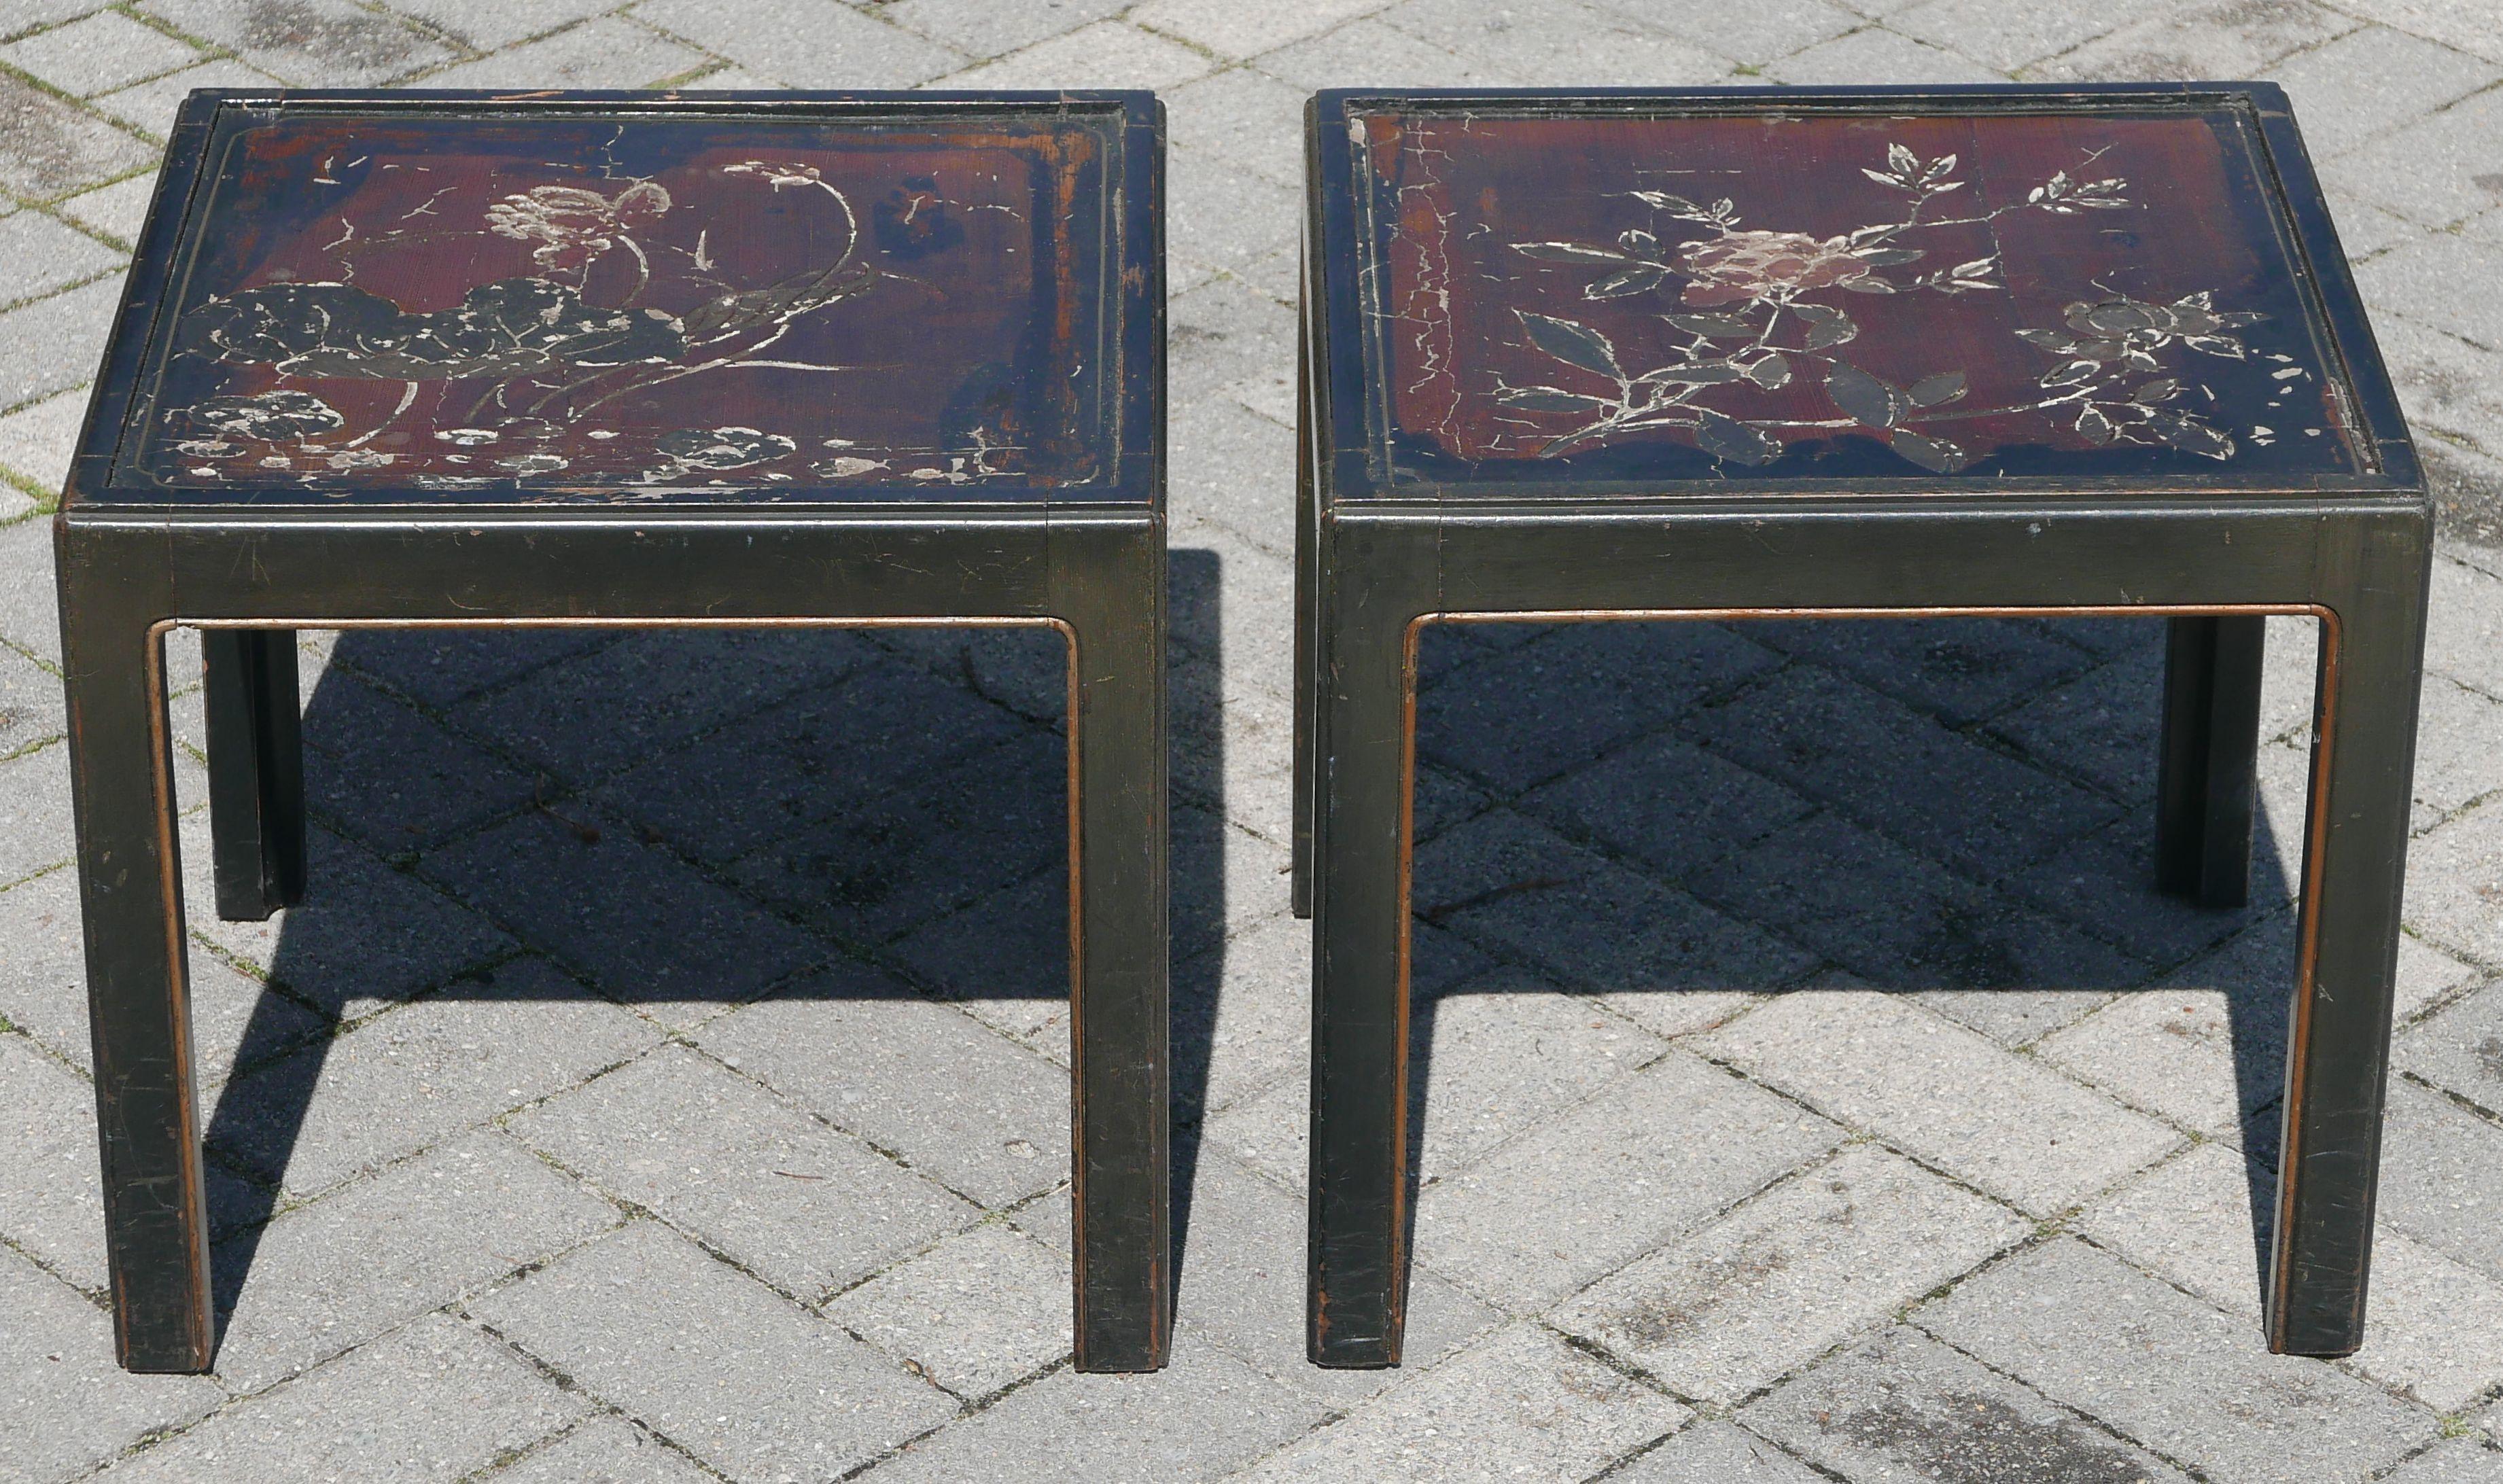 Pair of black lacquer Parsons tables inset with 18th century Chinese coromandel lacquer panels. Wonderful age acquired patina and depth.